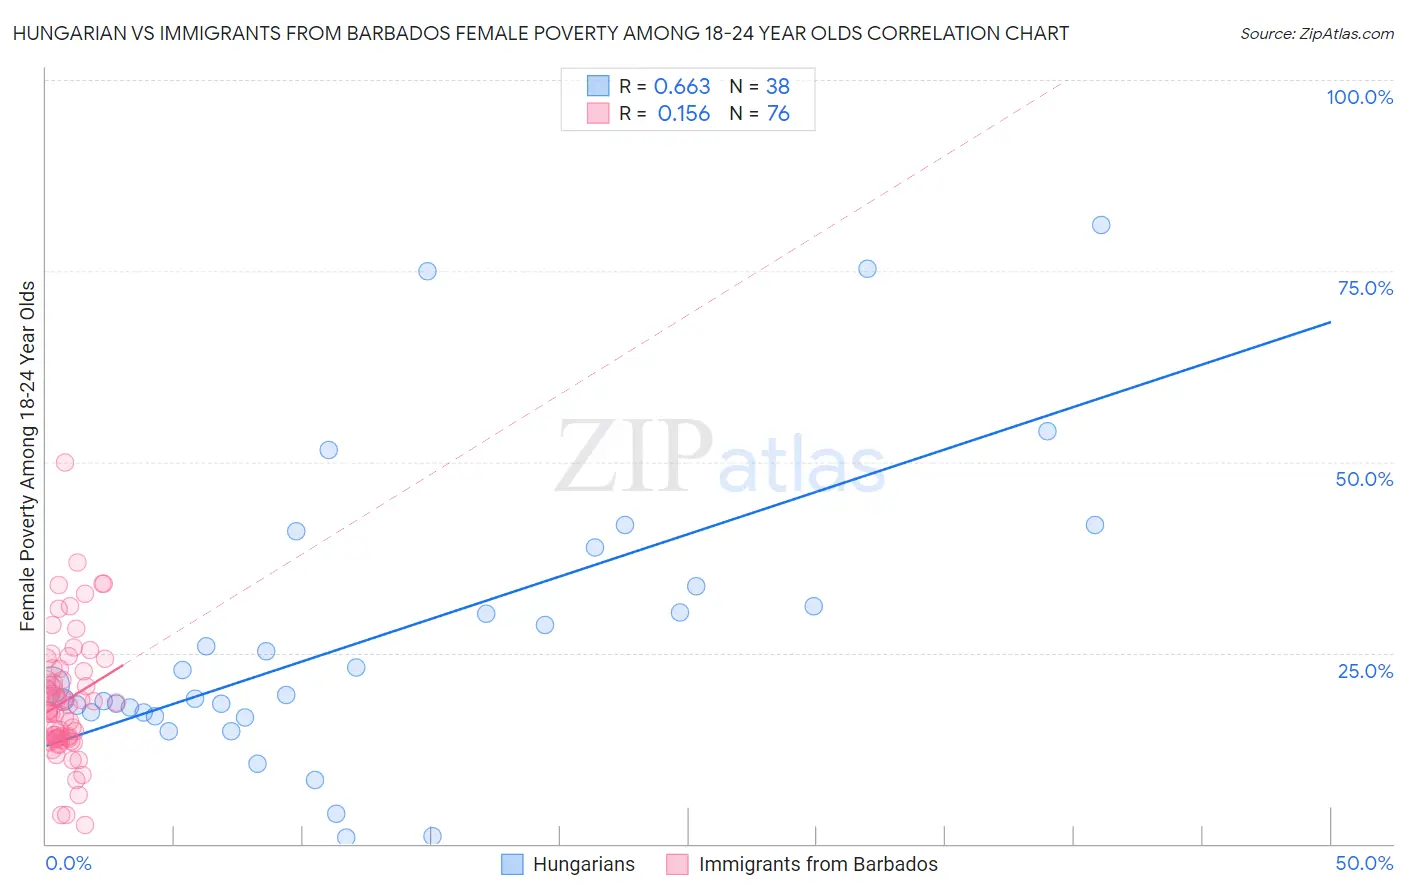 Hungarian vs Immigrants from Barbados Female Poverty Among 18-24 Year Olds